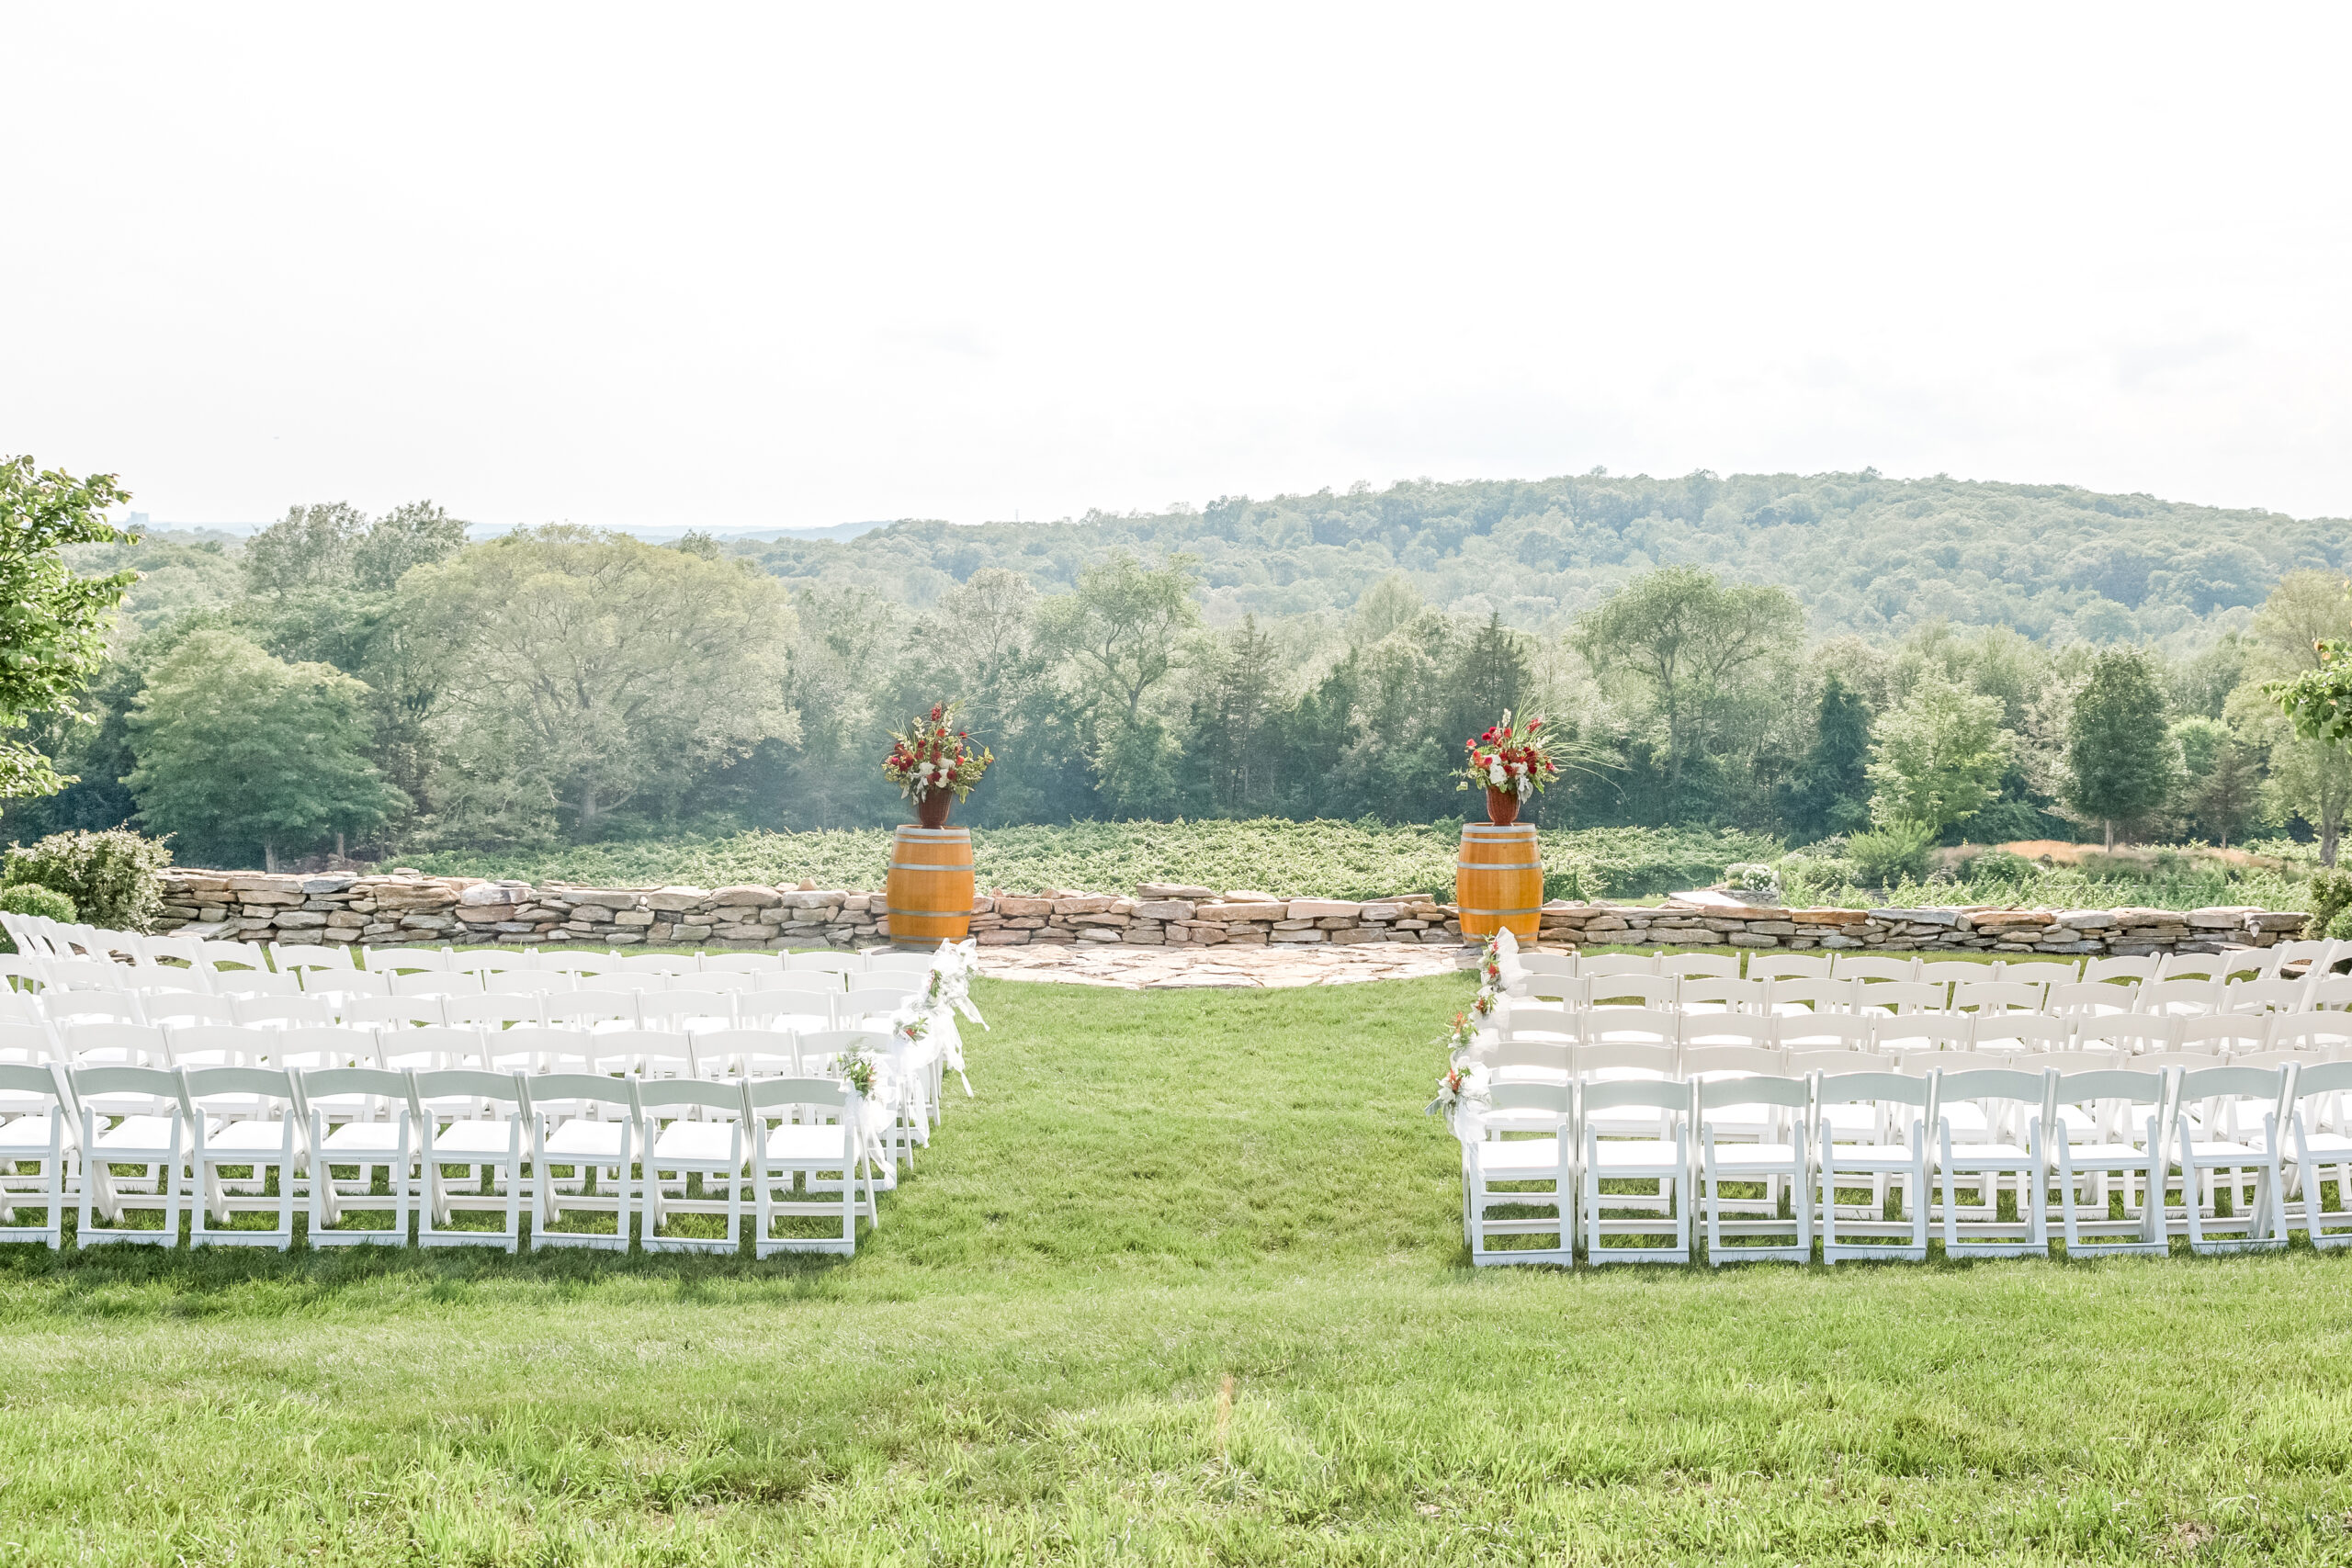 The Ceremony space at Preston Ridge Vineyard offers picturesque views of the vineyard below.